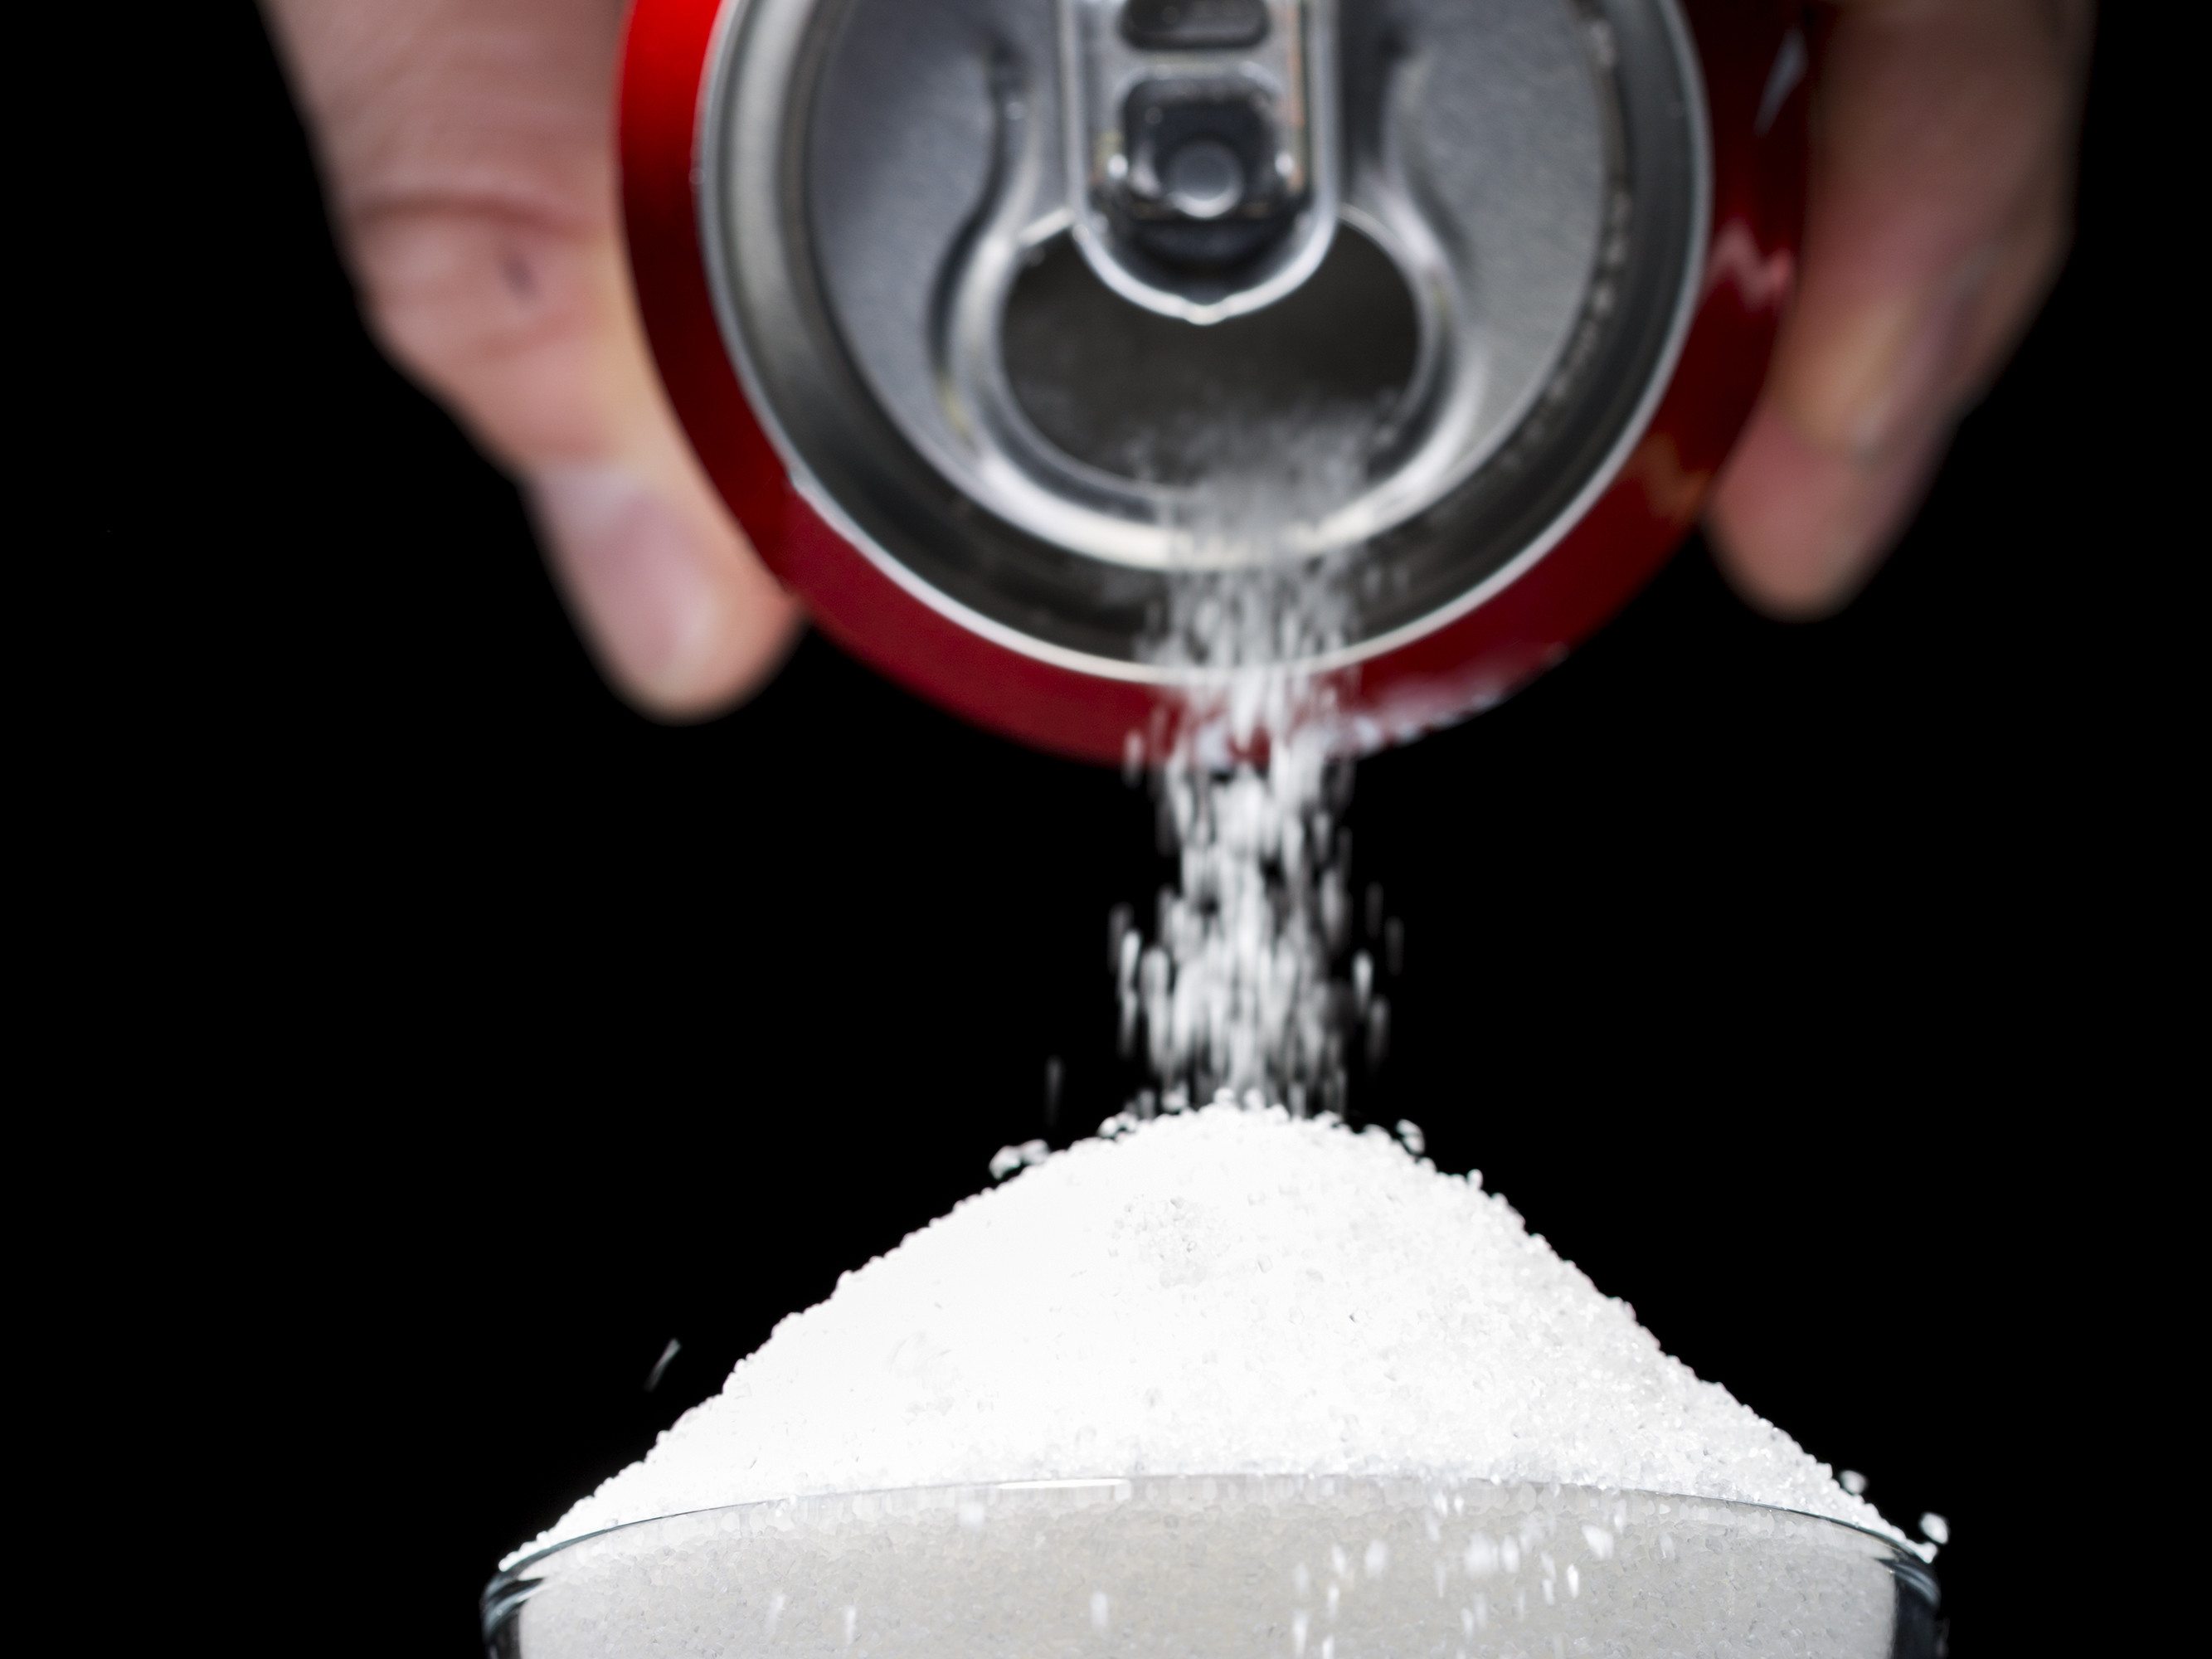 Proponents for labeling sugar-sweetened beverages believe that warnings could make parents think twice about health impacts before buying the products for children.